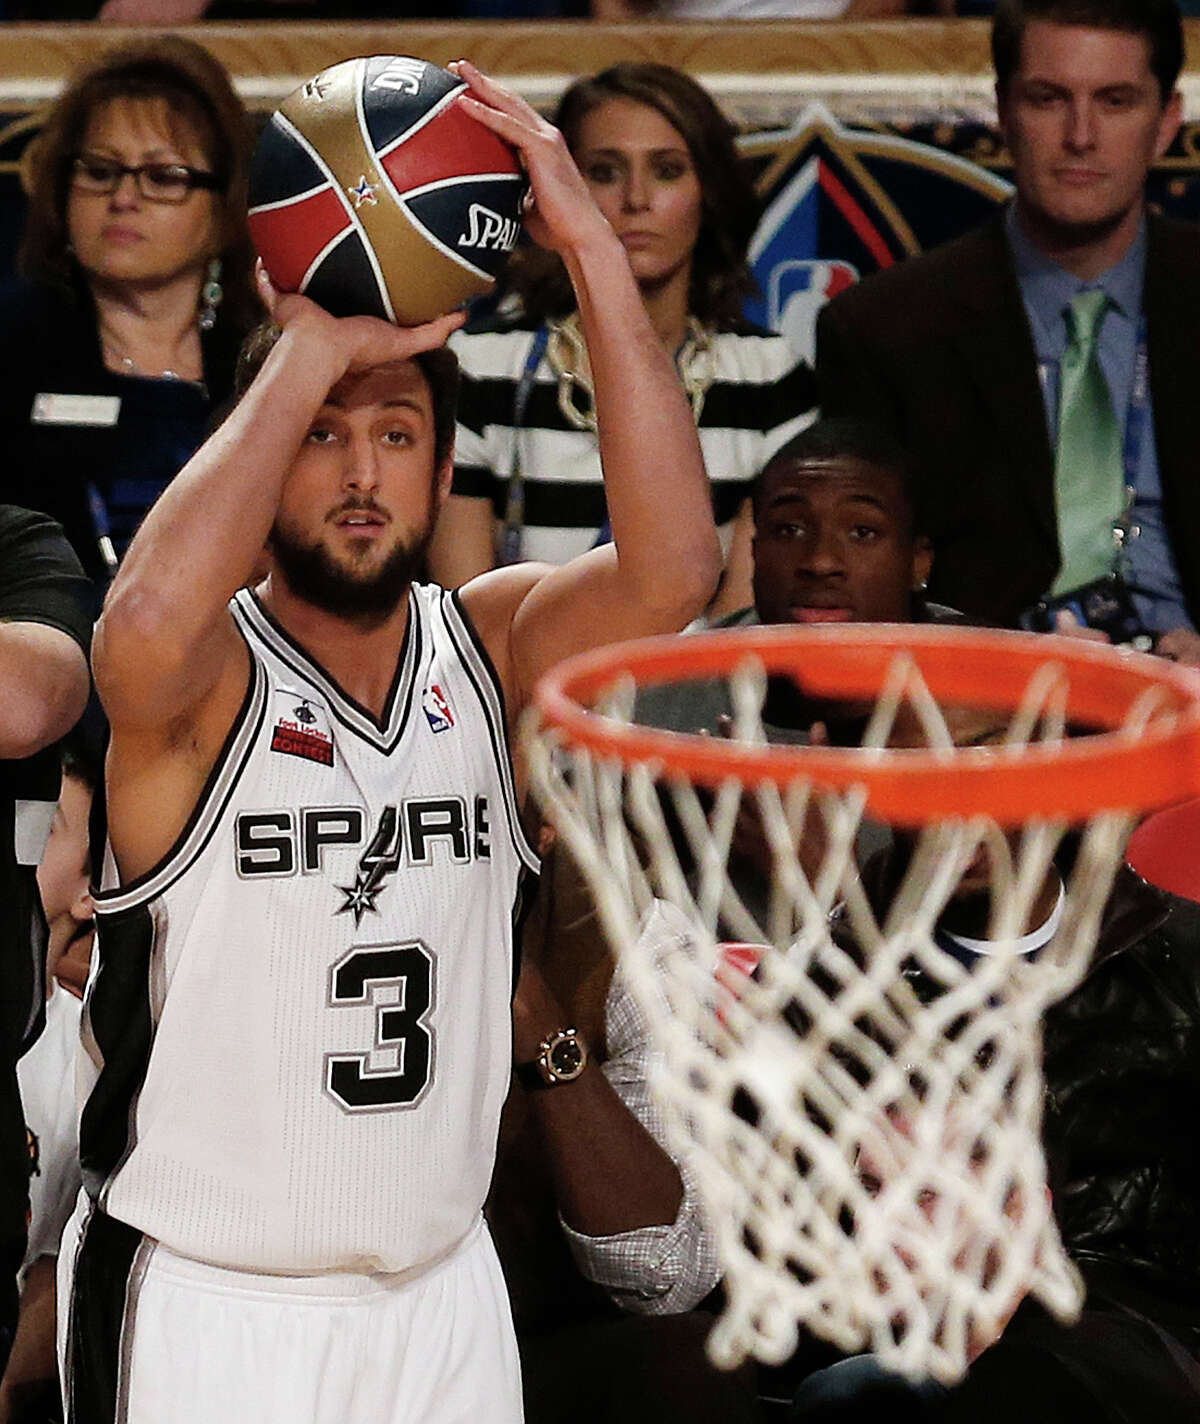 Marco Belinelli of the San Antonio Spurs shoots during the three-point contest during the skills competition at the NBA All Star basketball game, Saturday, Feb. 15, 2014, in New Orleans. (AP Photo/Bill Haber)